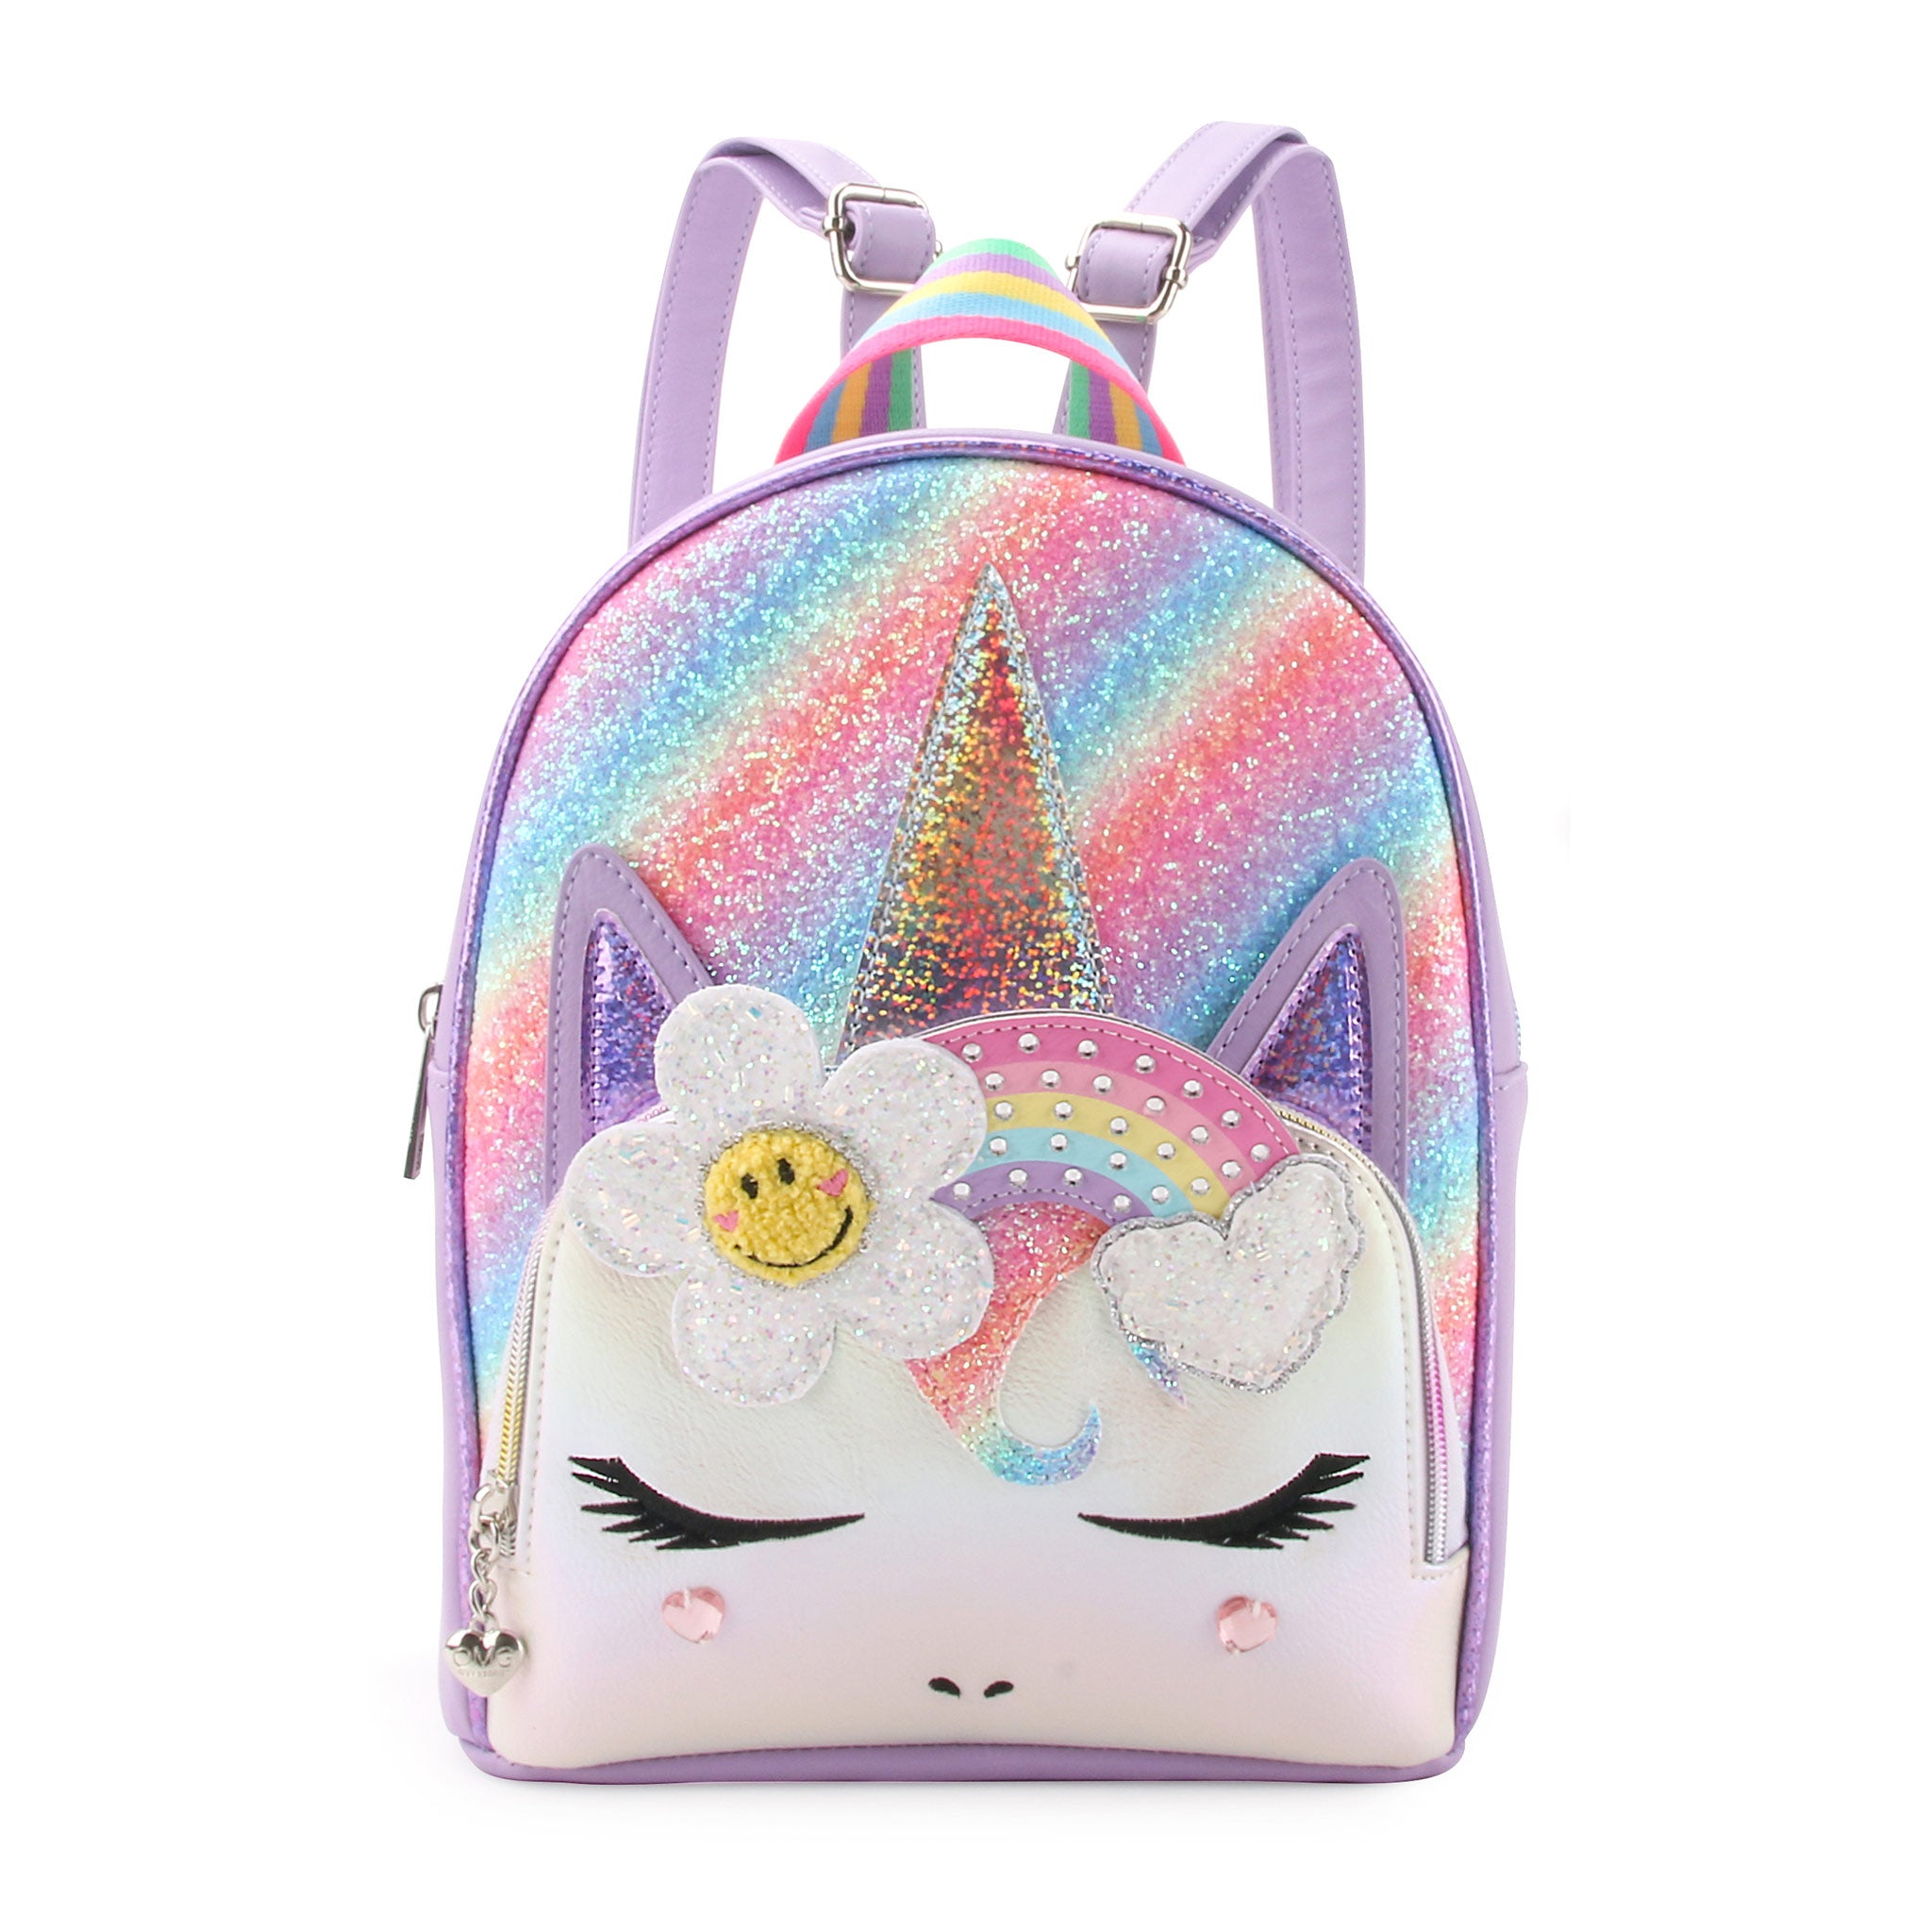 Front  view of purple glitter, unicorn face mini backpack with glitter rainbow and smiley face flower appliqués